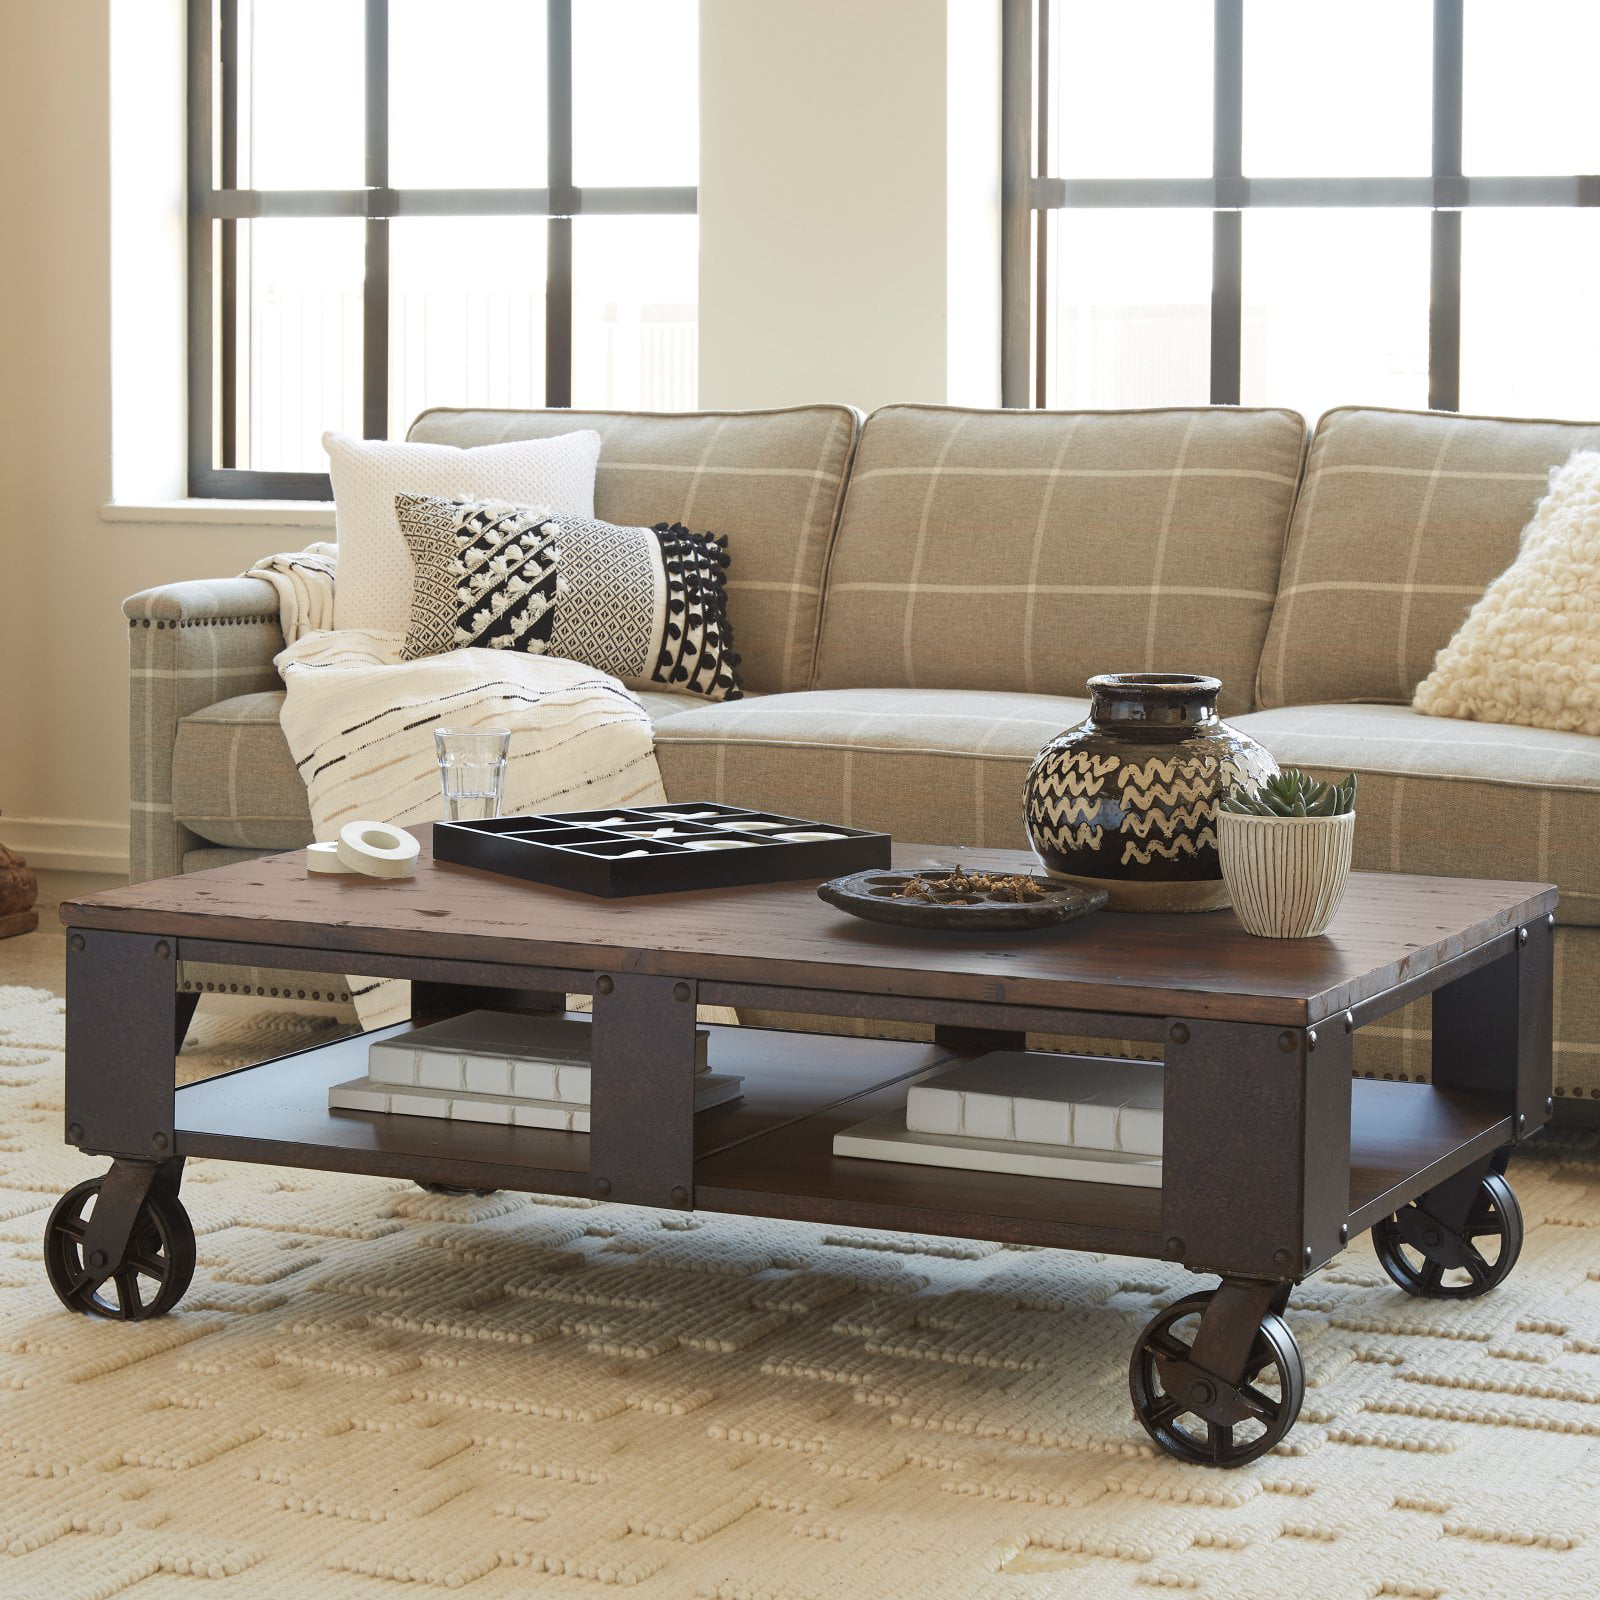 Unique Coffee Tables With Wheels 